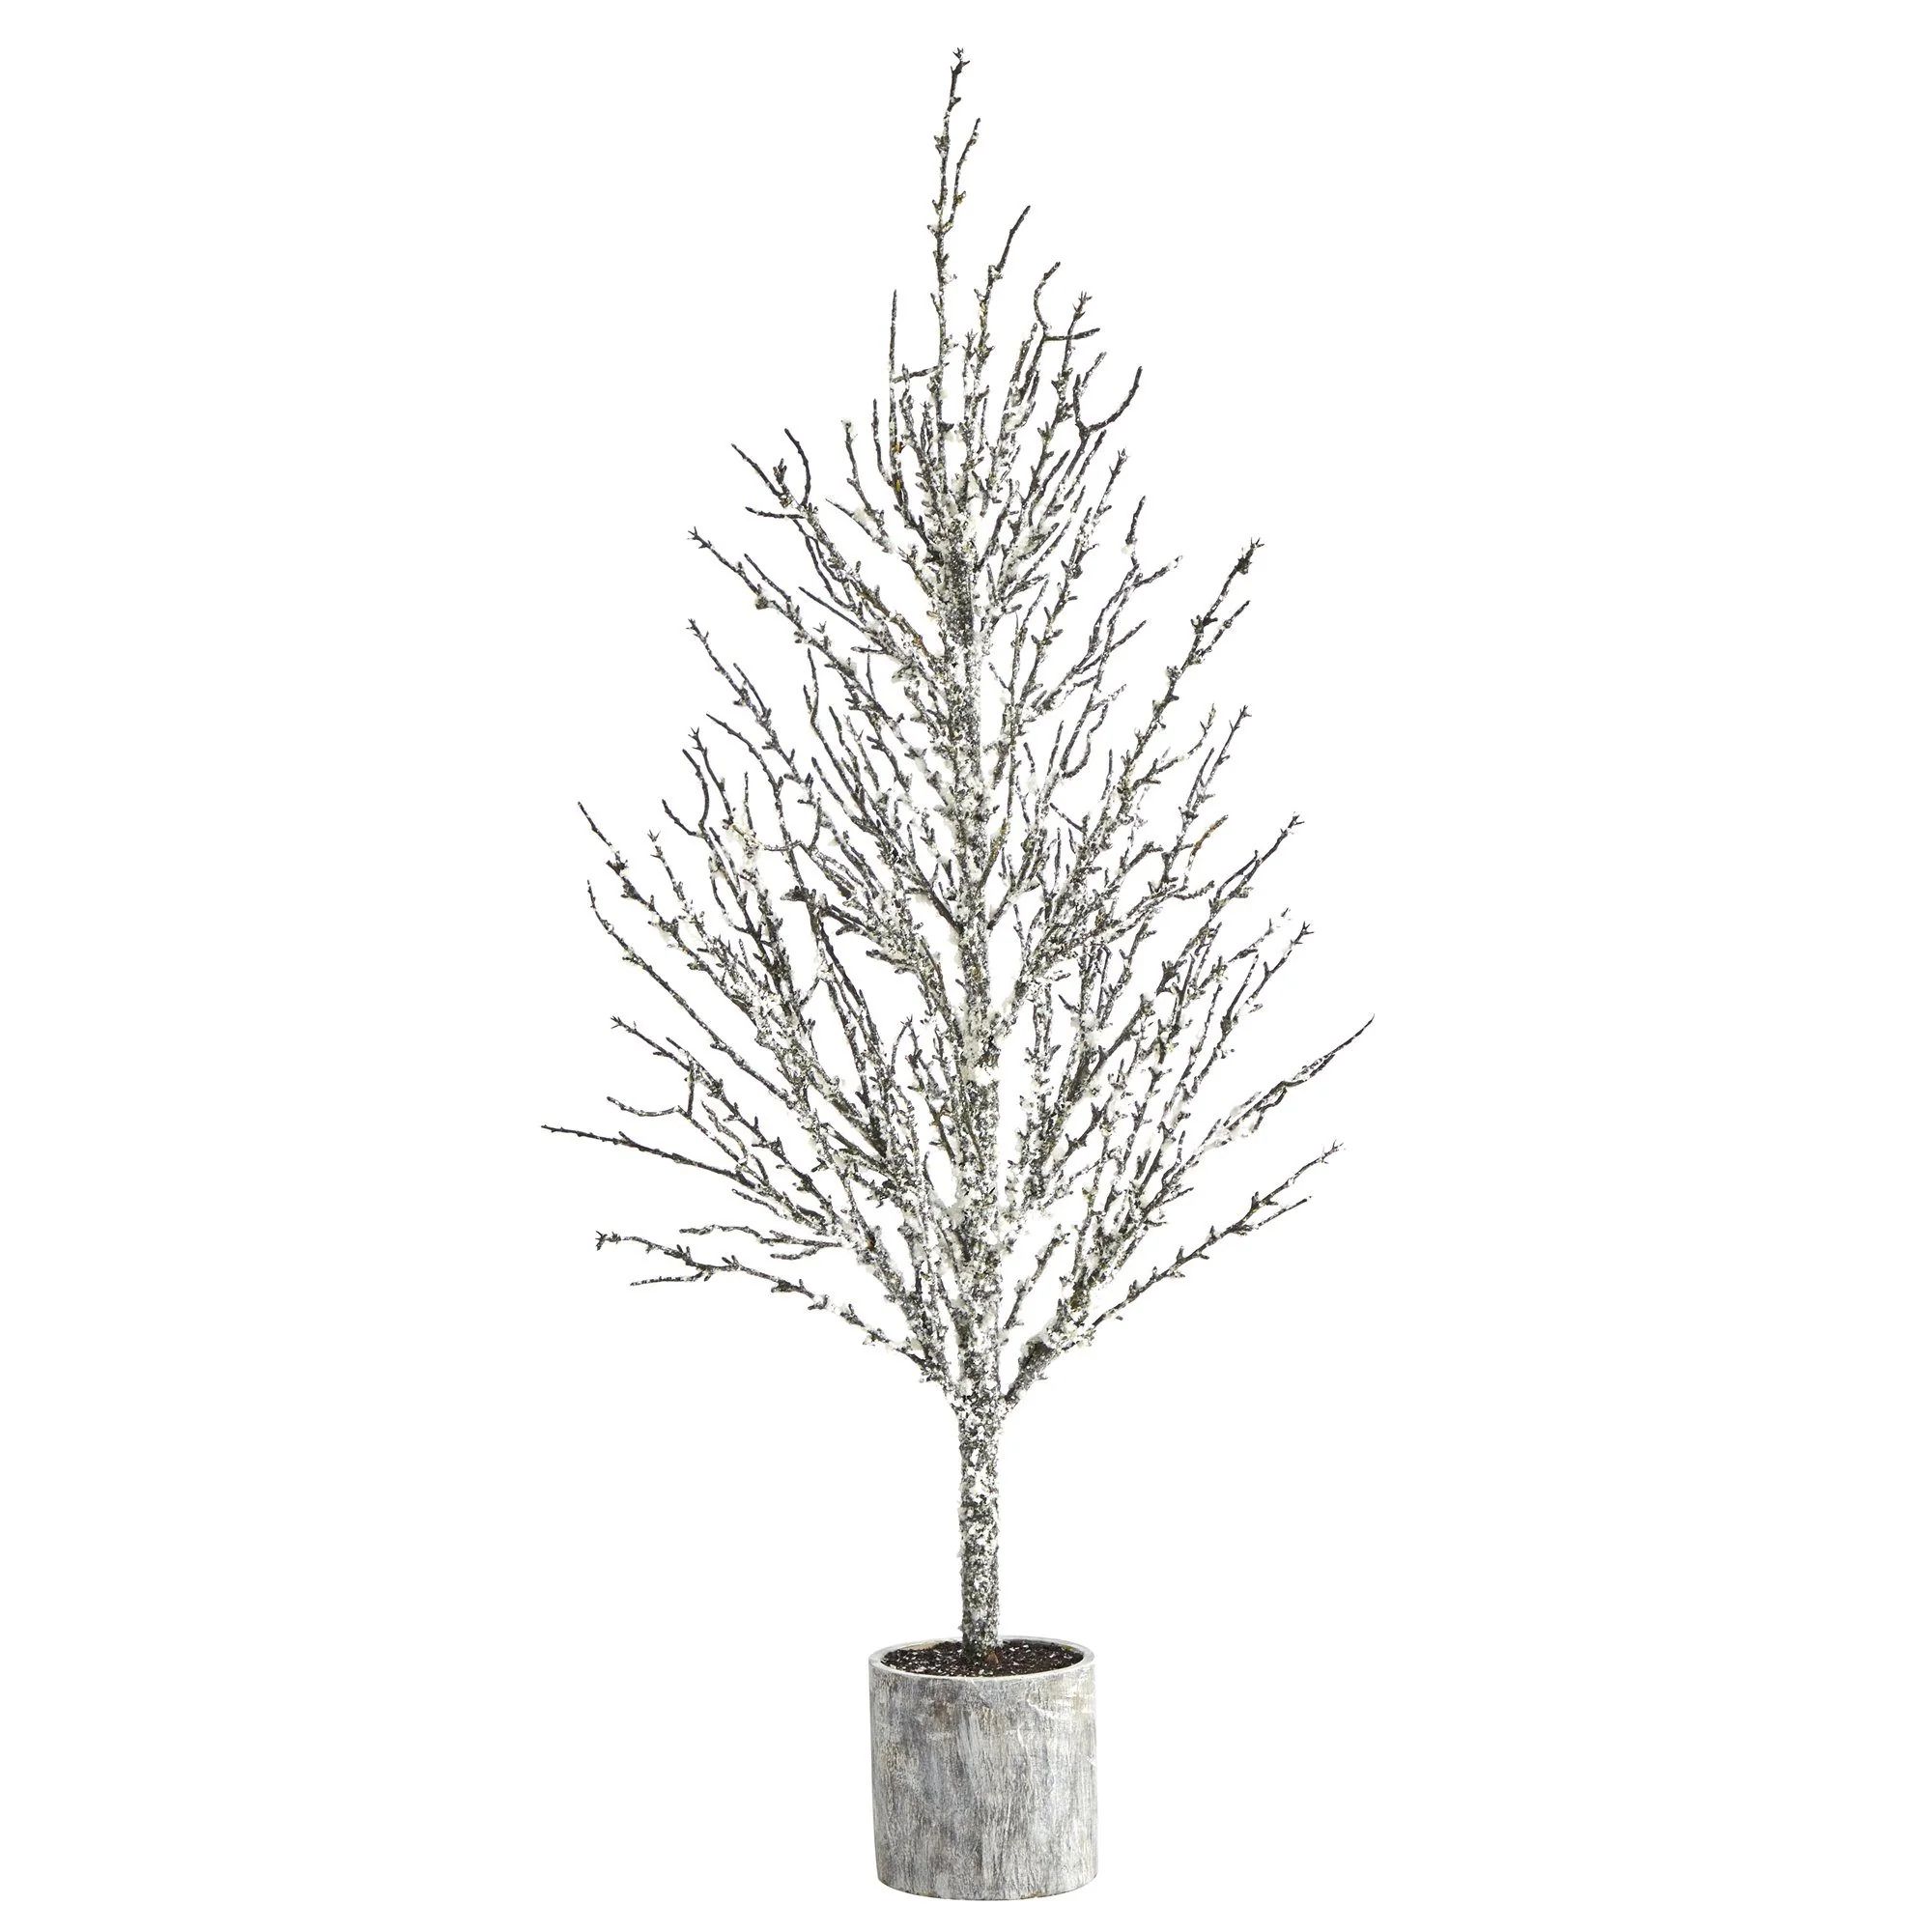 4’ Snowed Twig Artificial Christmas Tree in Decorative Planter | Nearly Natural